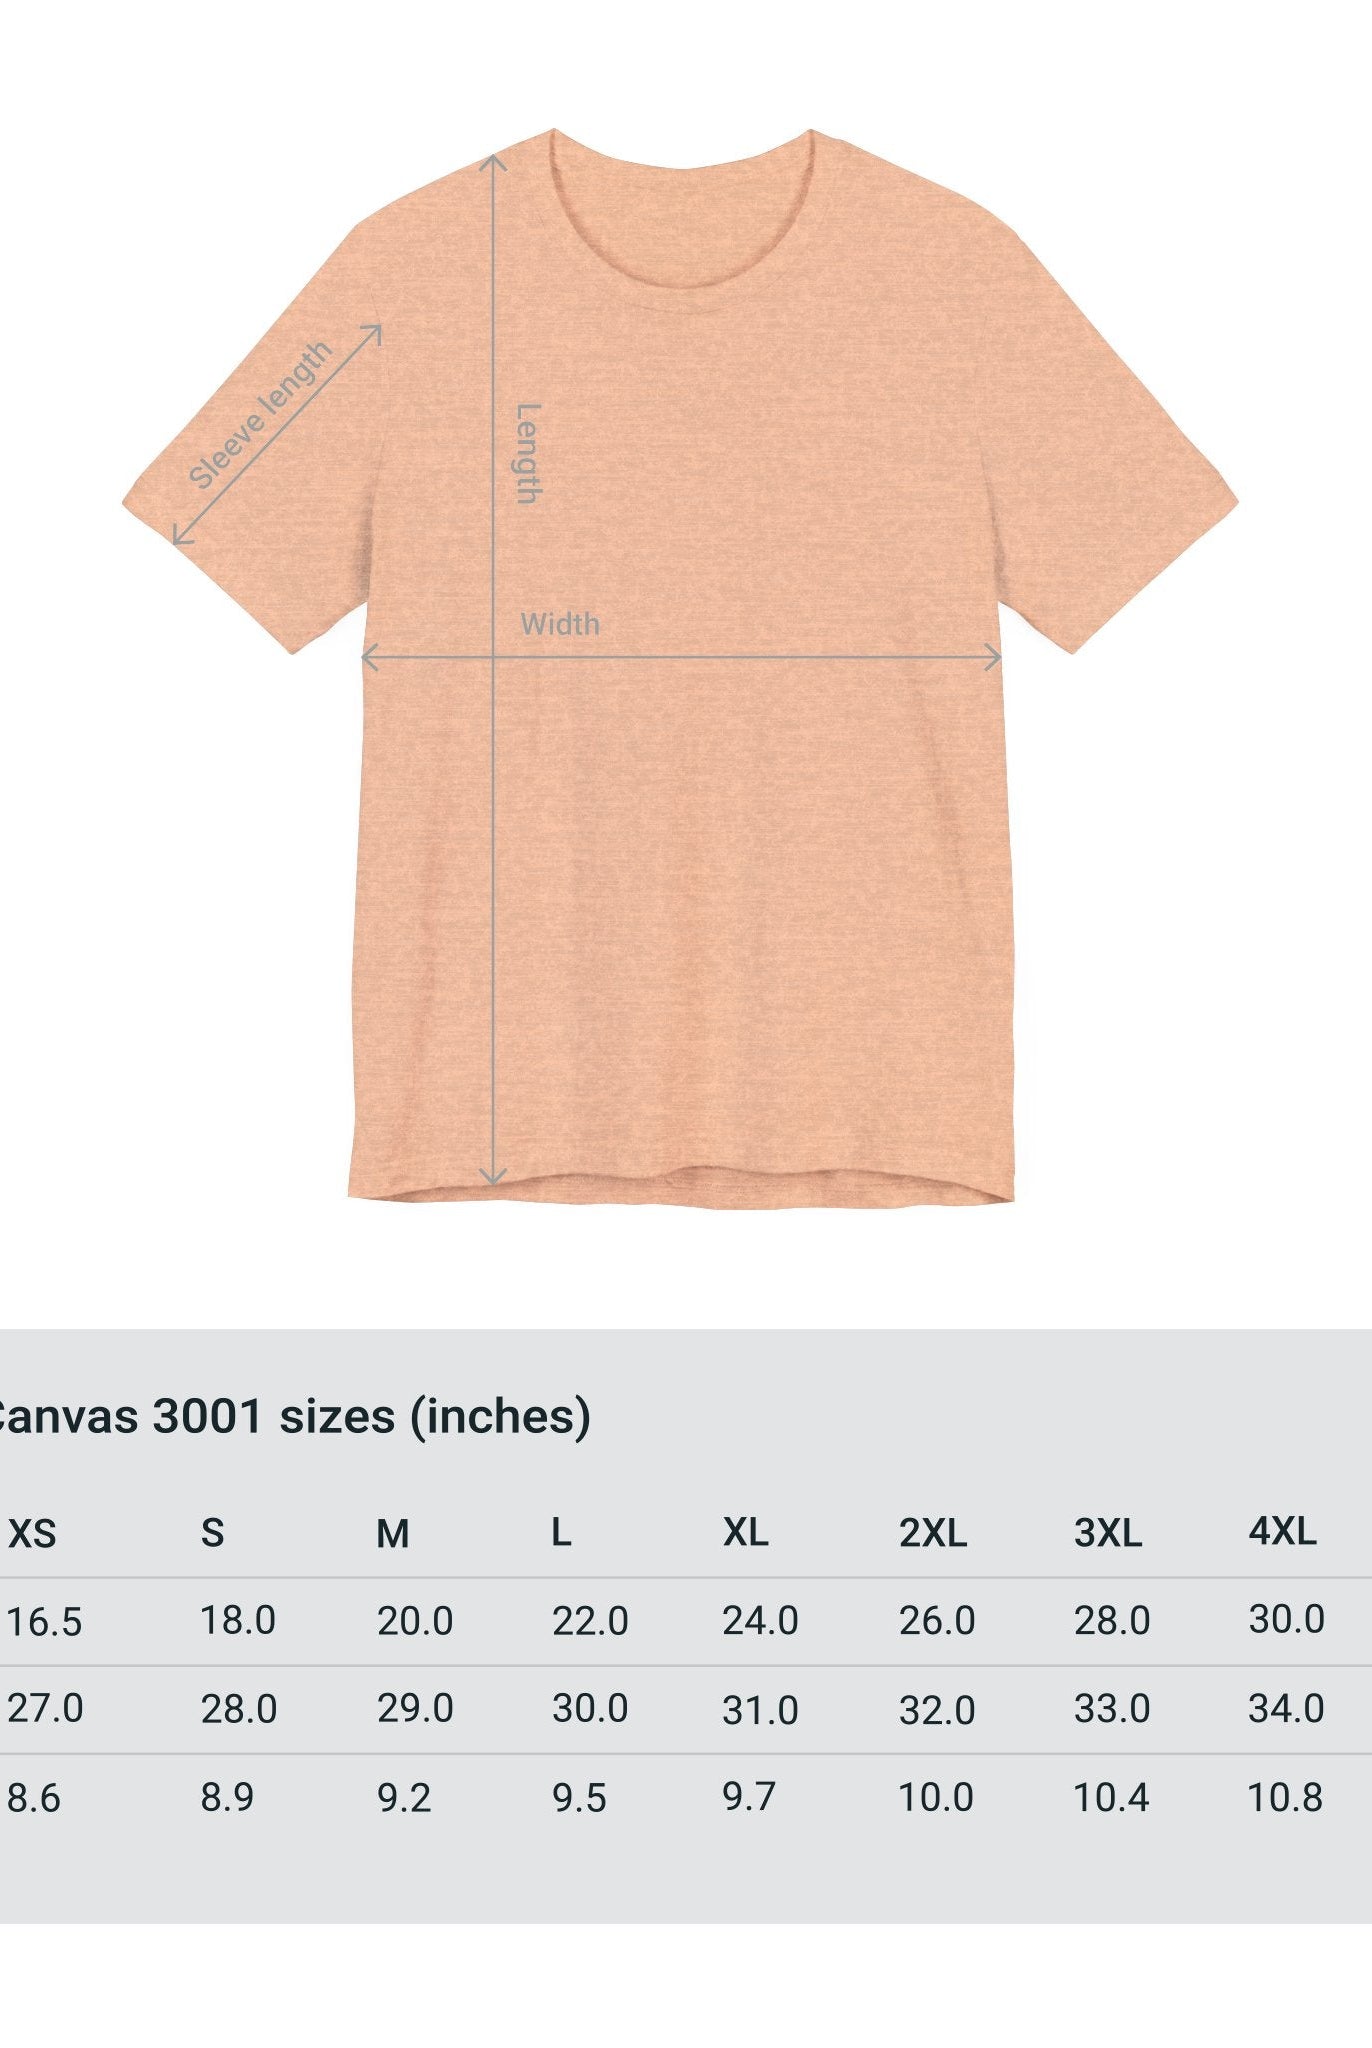 Adventure Unlimited Surfing T-Shirt Size Guide for Bella Canvas EU - Direct-to-Garment Printed Item